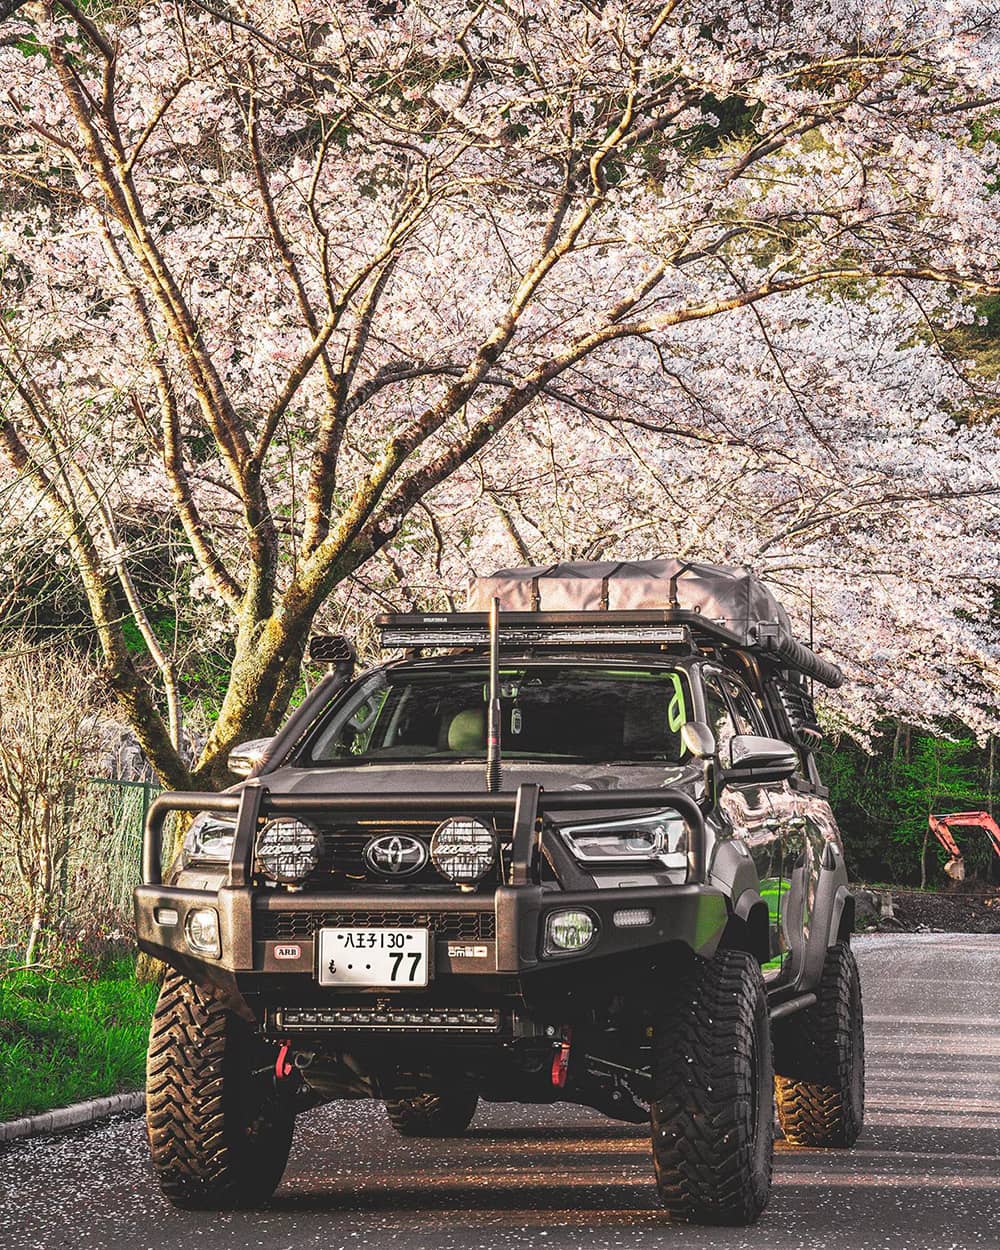 Japanese 4x4 trucks with offroad modifications - lifted Toyota Hilux